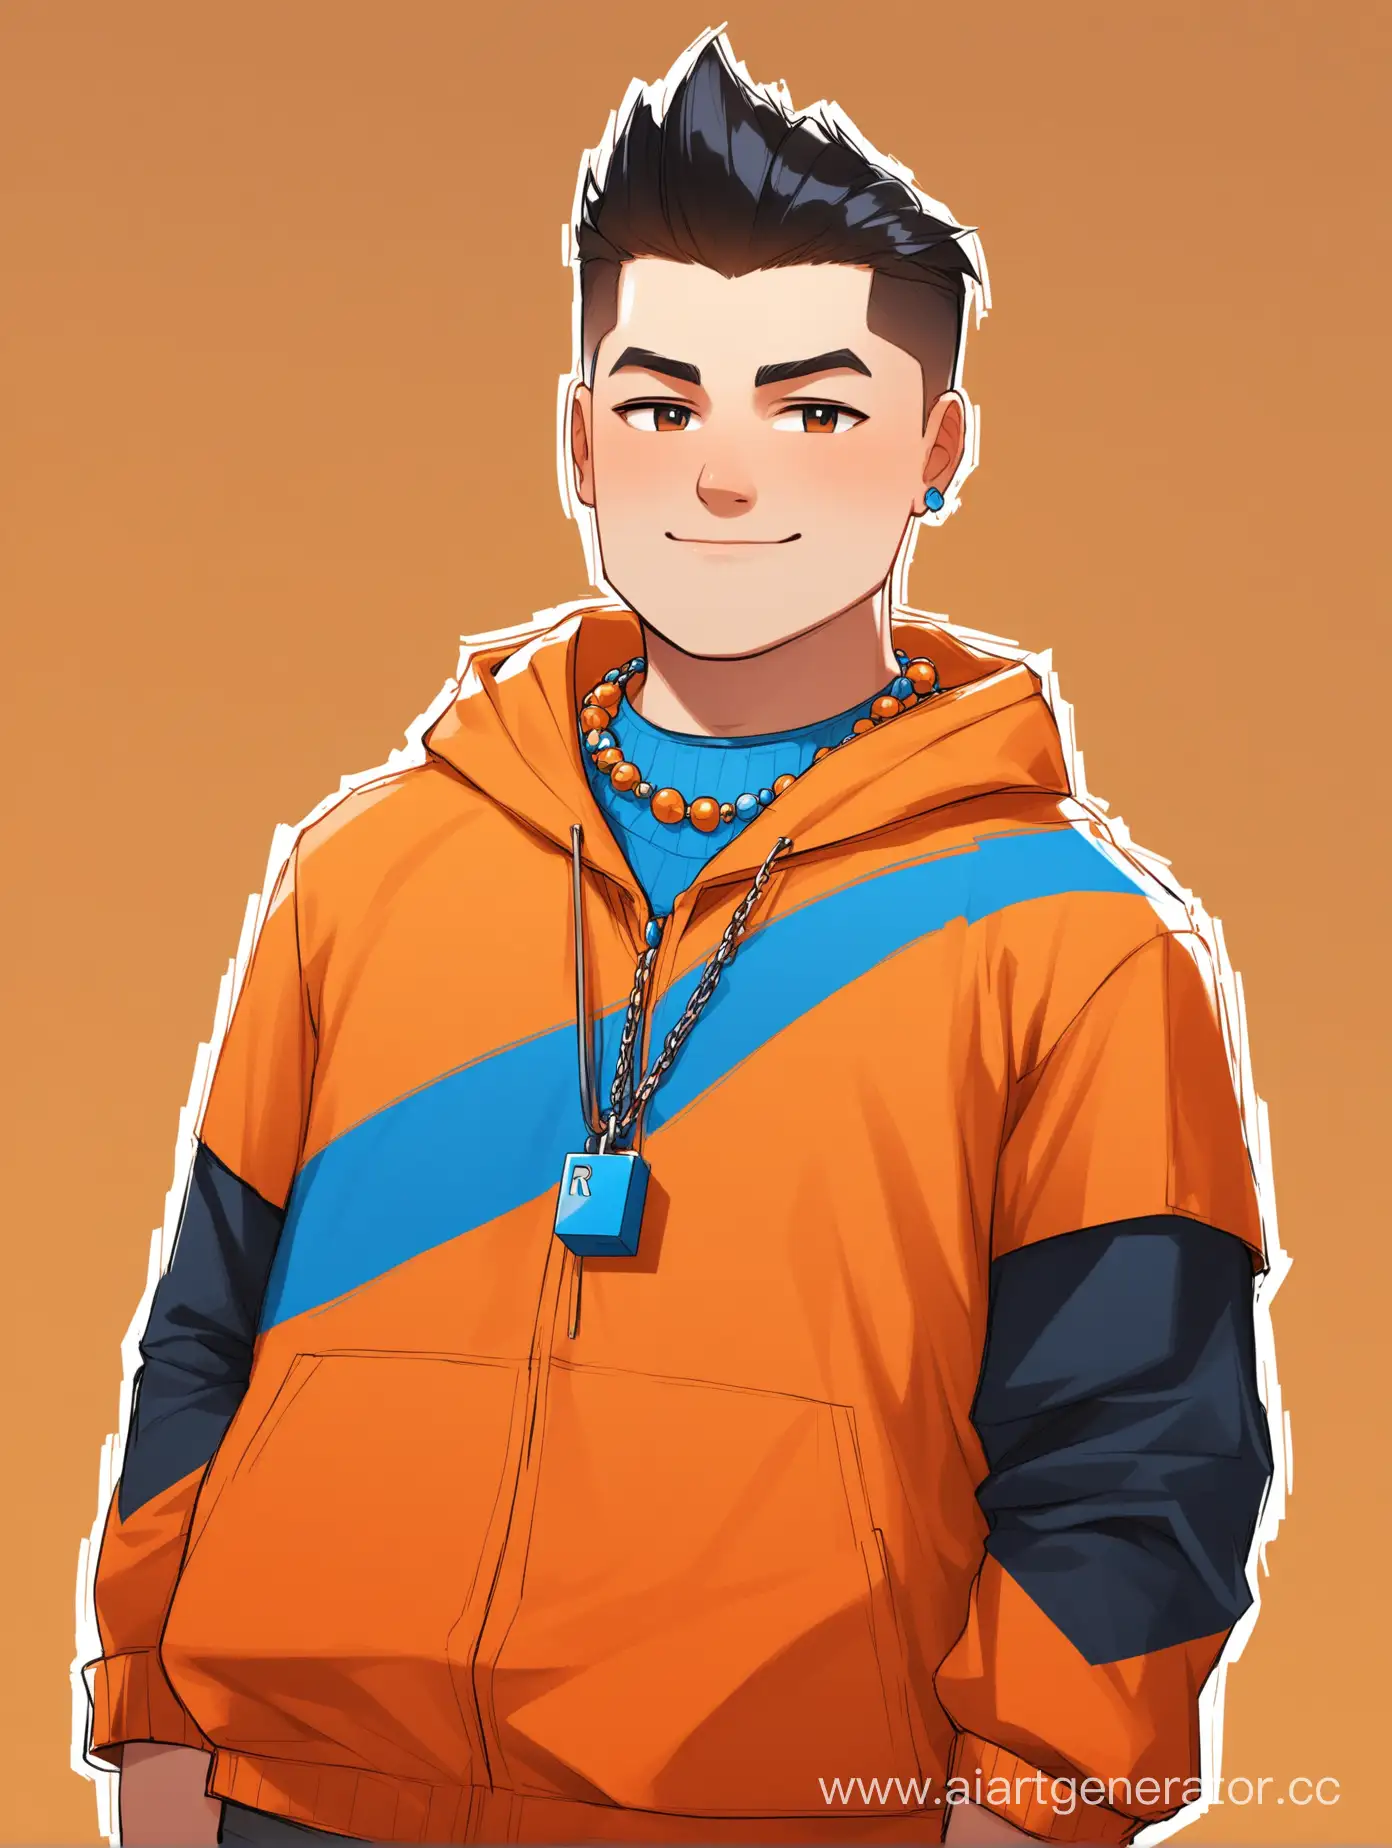 Roblox-Character-in-Orange-Jacket-and-Blue-Necklace